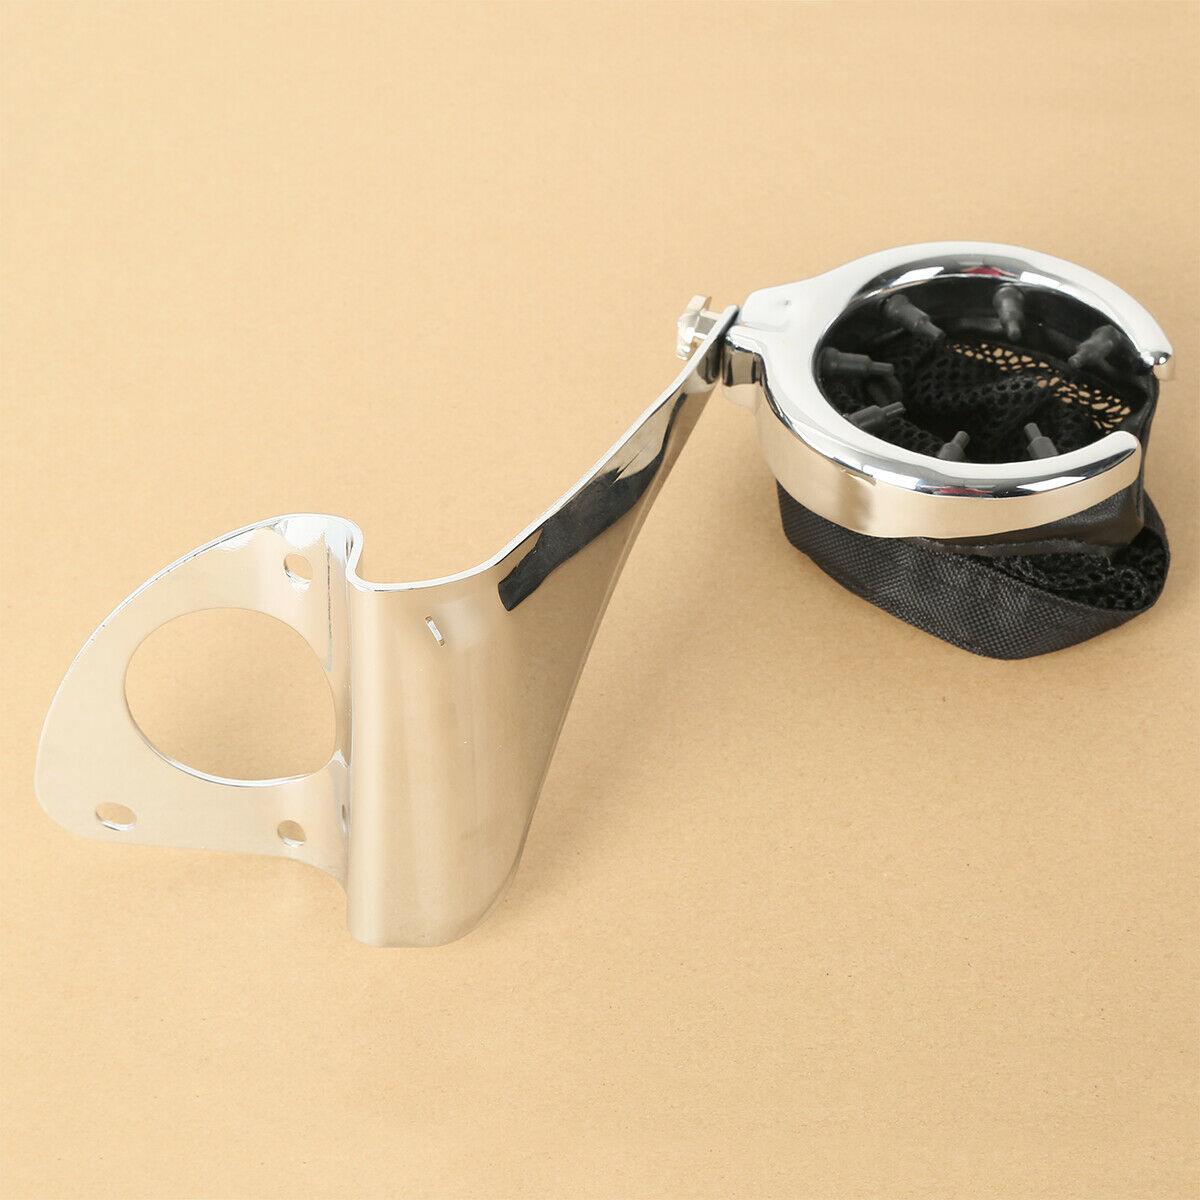 Rear Passenger Drink Cup Holder Fit For Harley Electra Glide Ultra Limited 14-21 - Moto Life Products